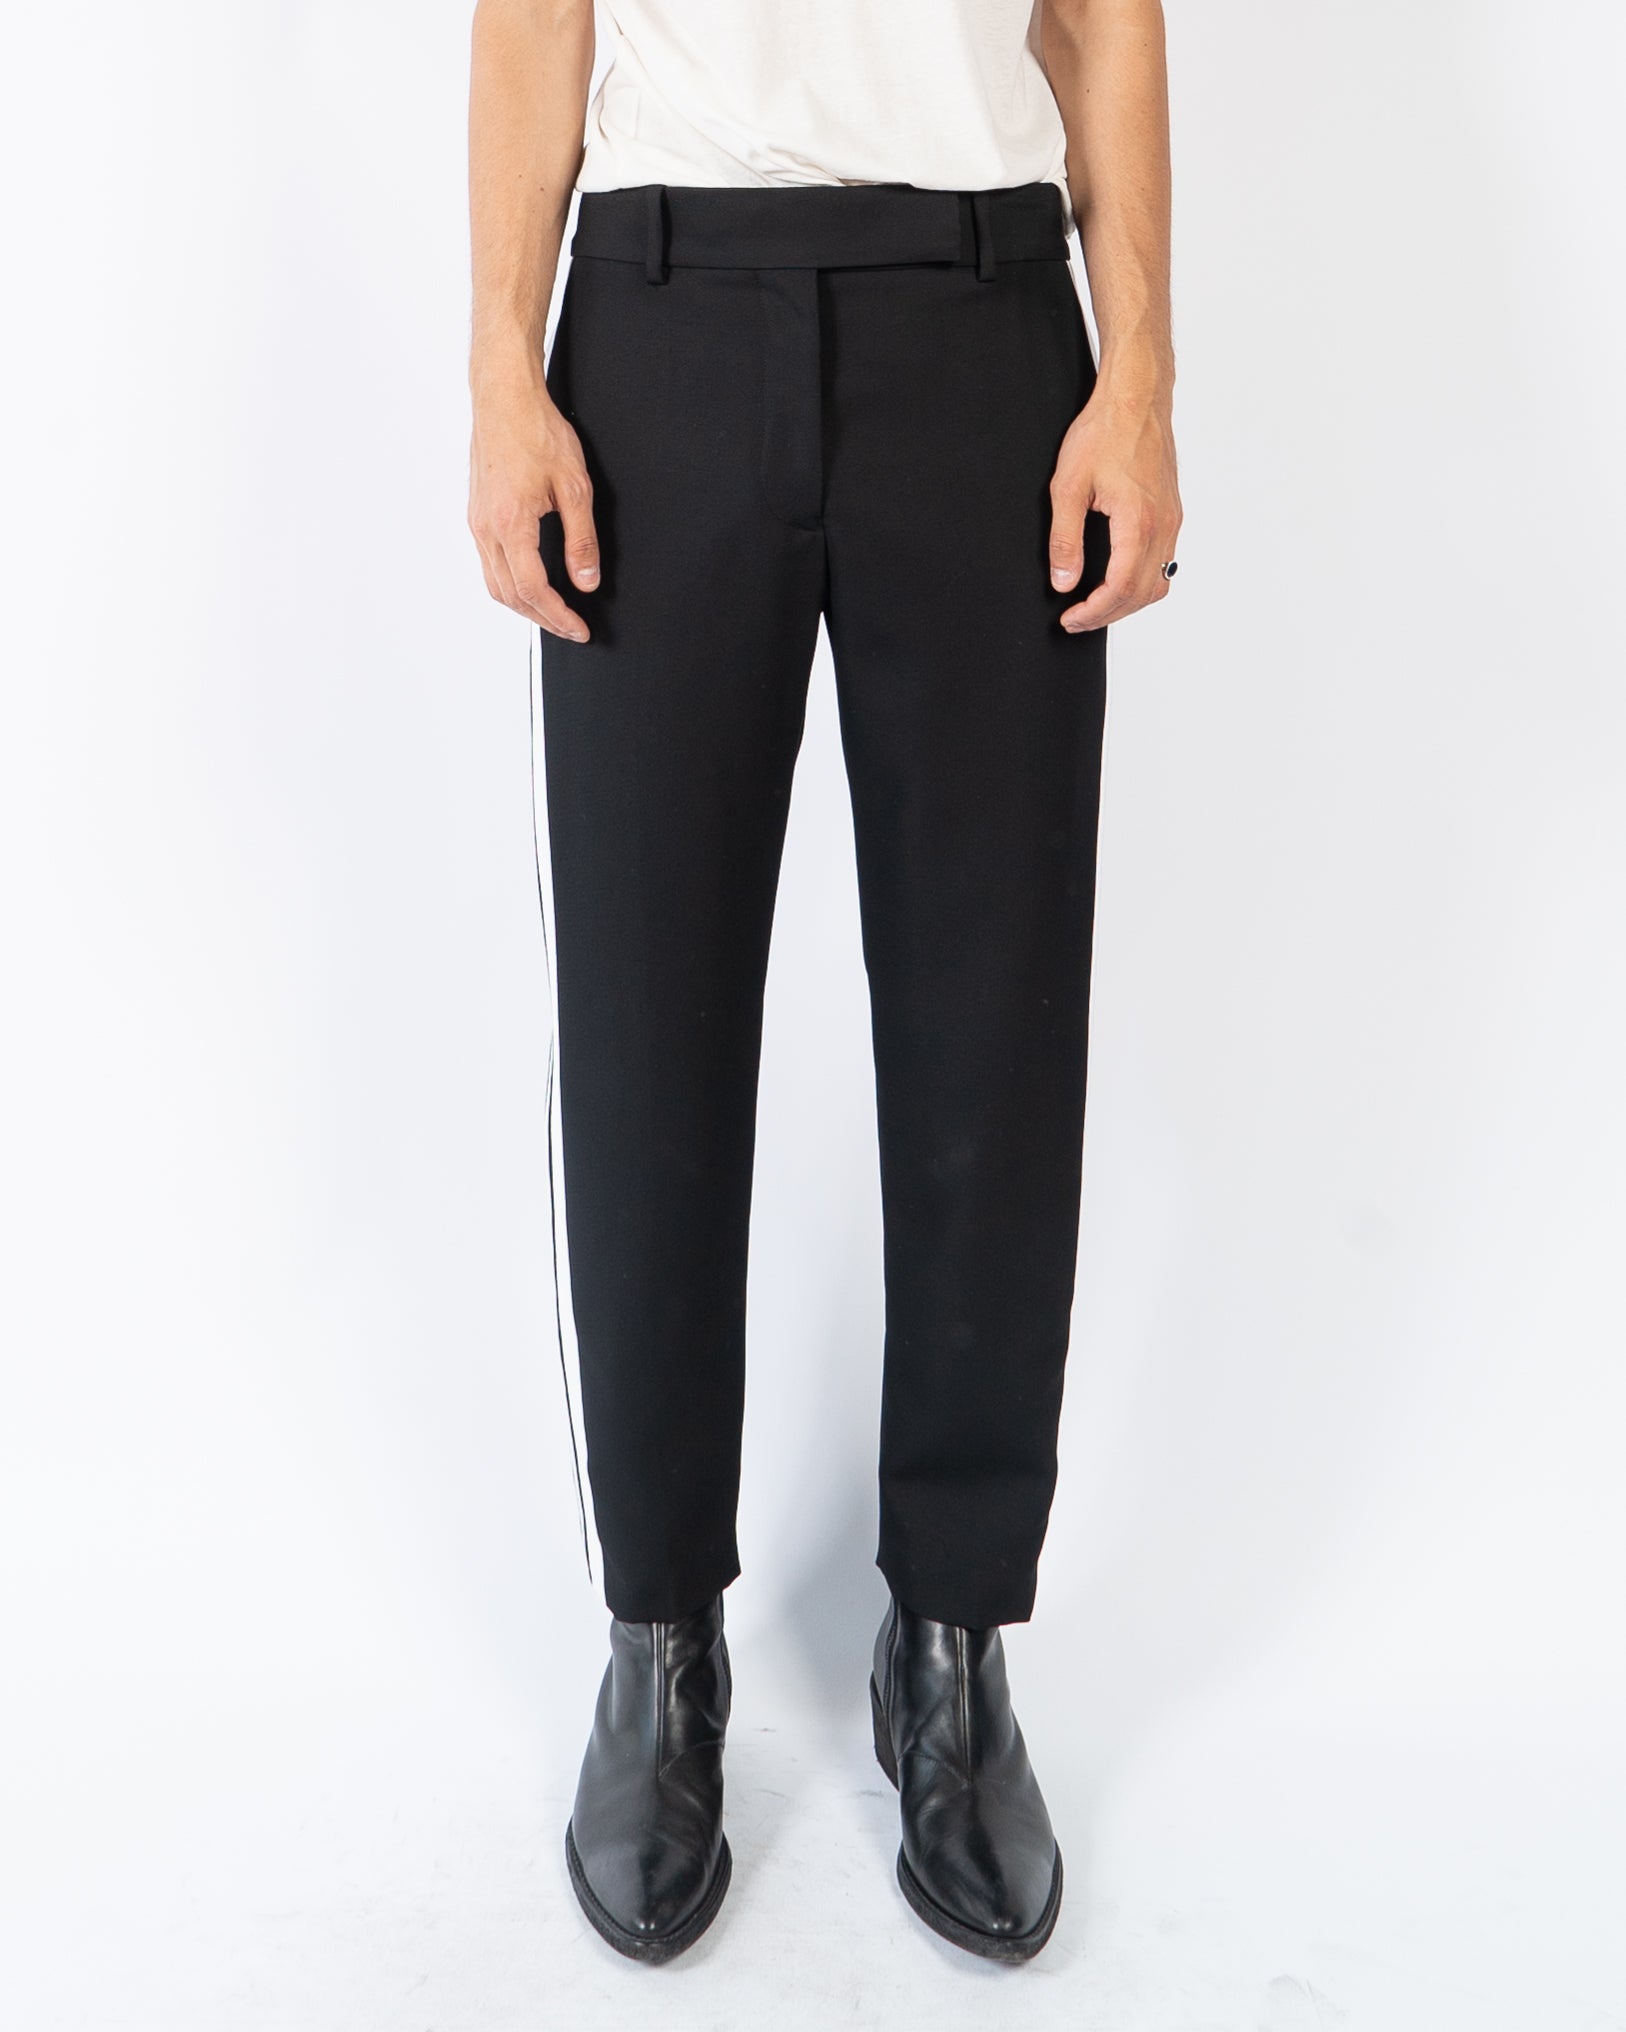 FW19 Miles Black Side Striped Trousers